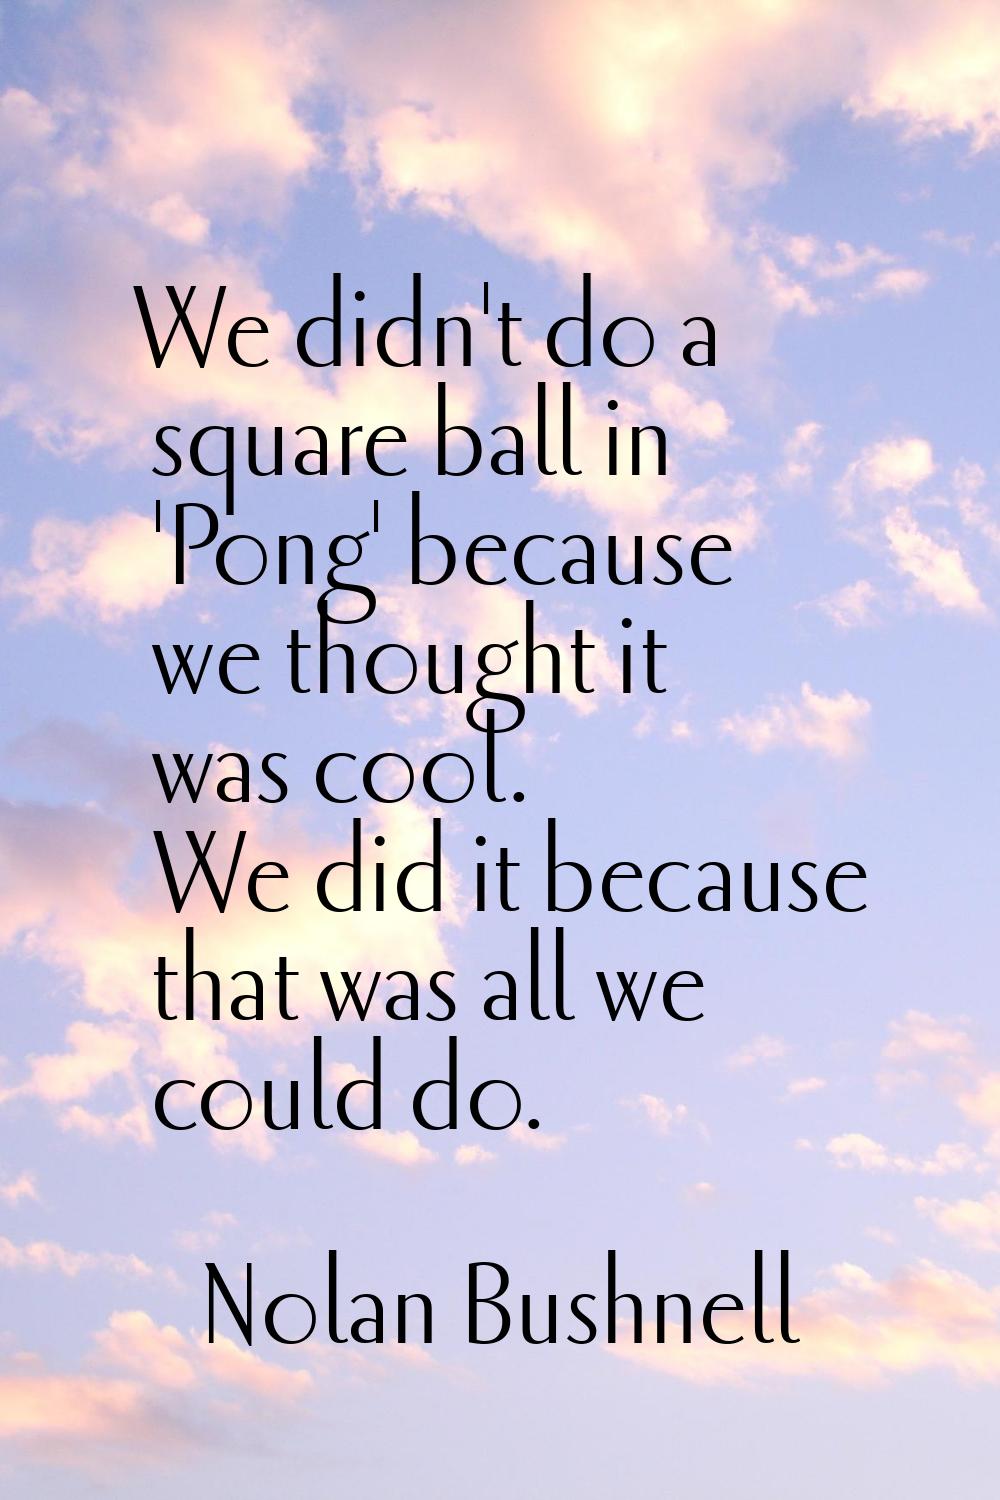 We didn't do a square ball in 'Pong' because we thought it was cool. We did it because that was all